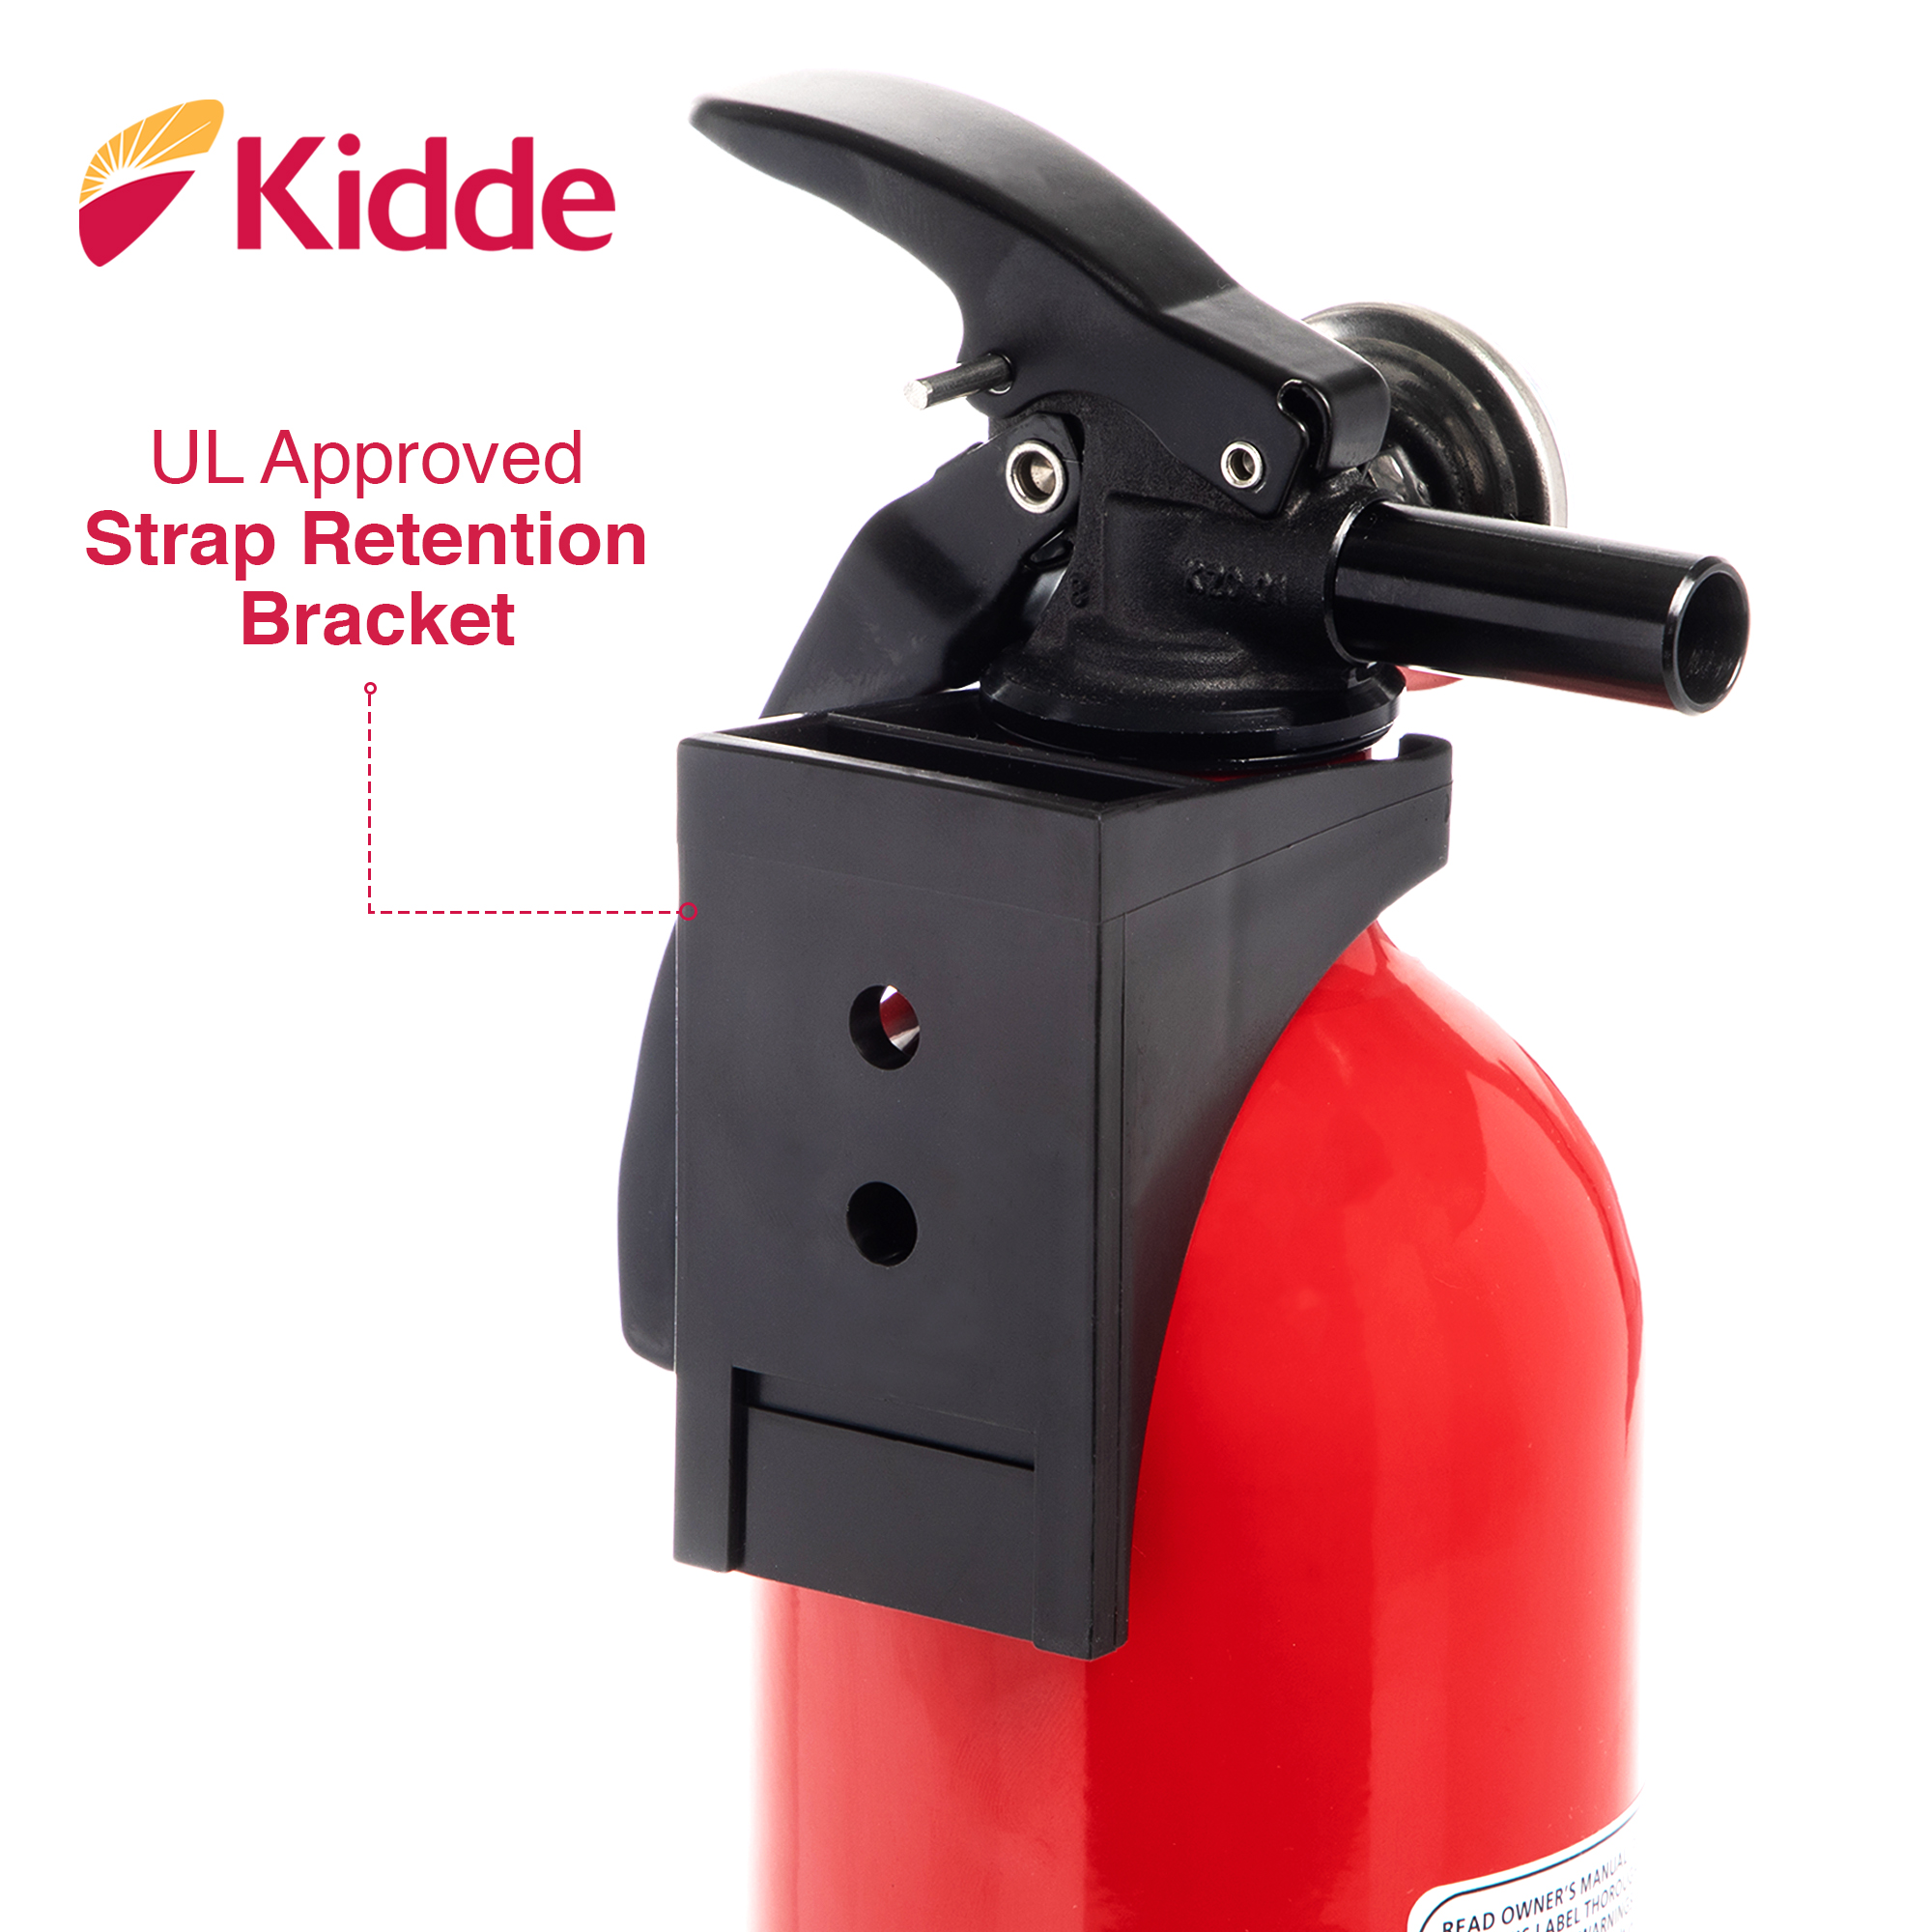 Kidde Multipurpose Home Fire Extinguisher, UL Rated 1-A:10-B:C, Model KD82-110ABC - image 4 of 8